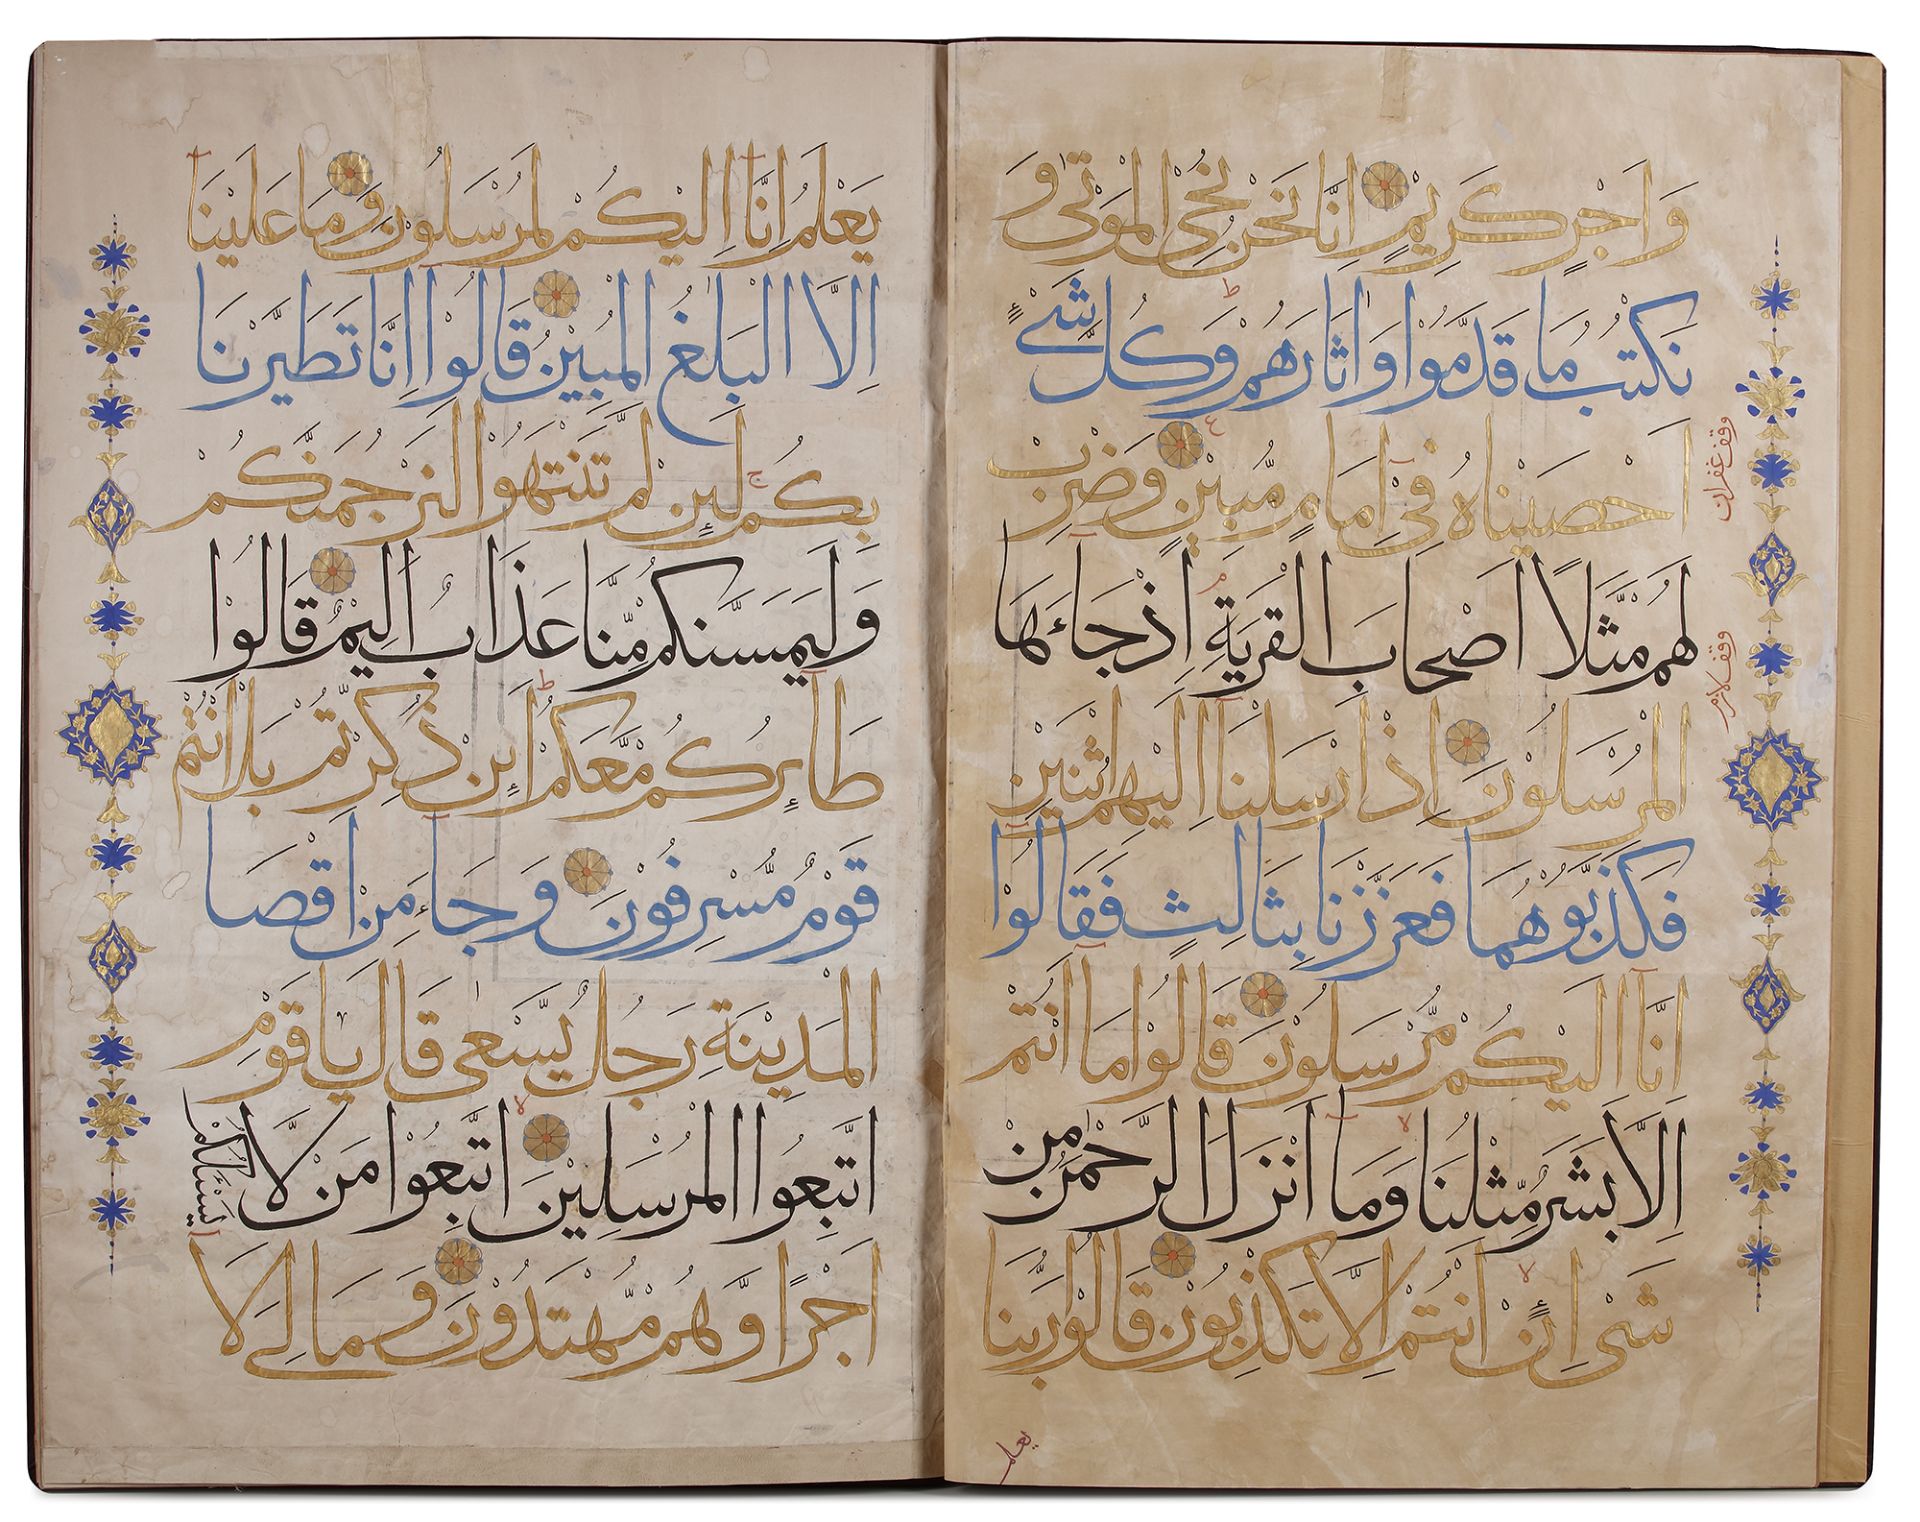 A LARGE OF QURAN SECTION, INDIA, LATE 19TH CENTURY - Image 3 of 13